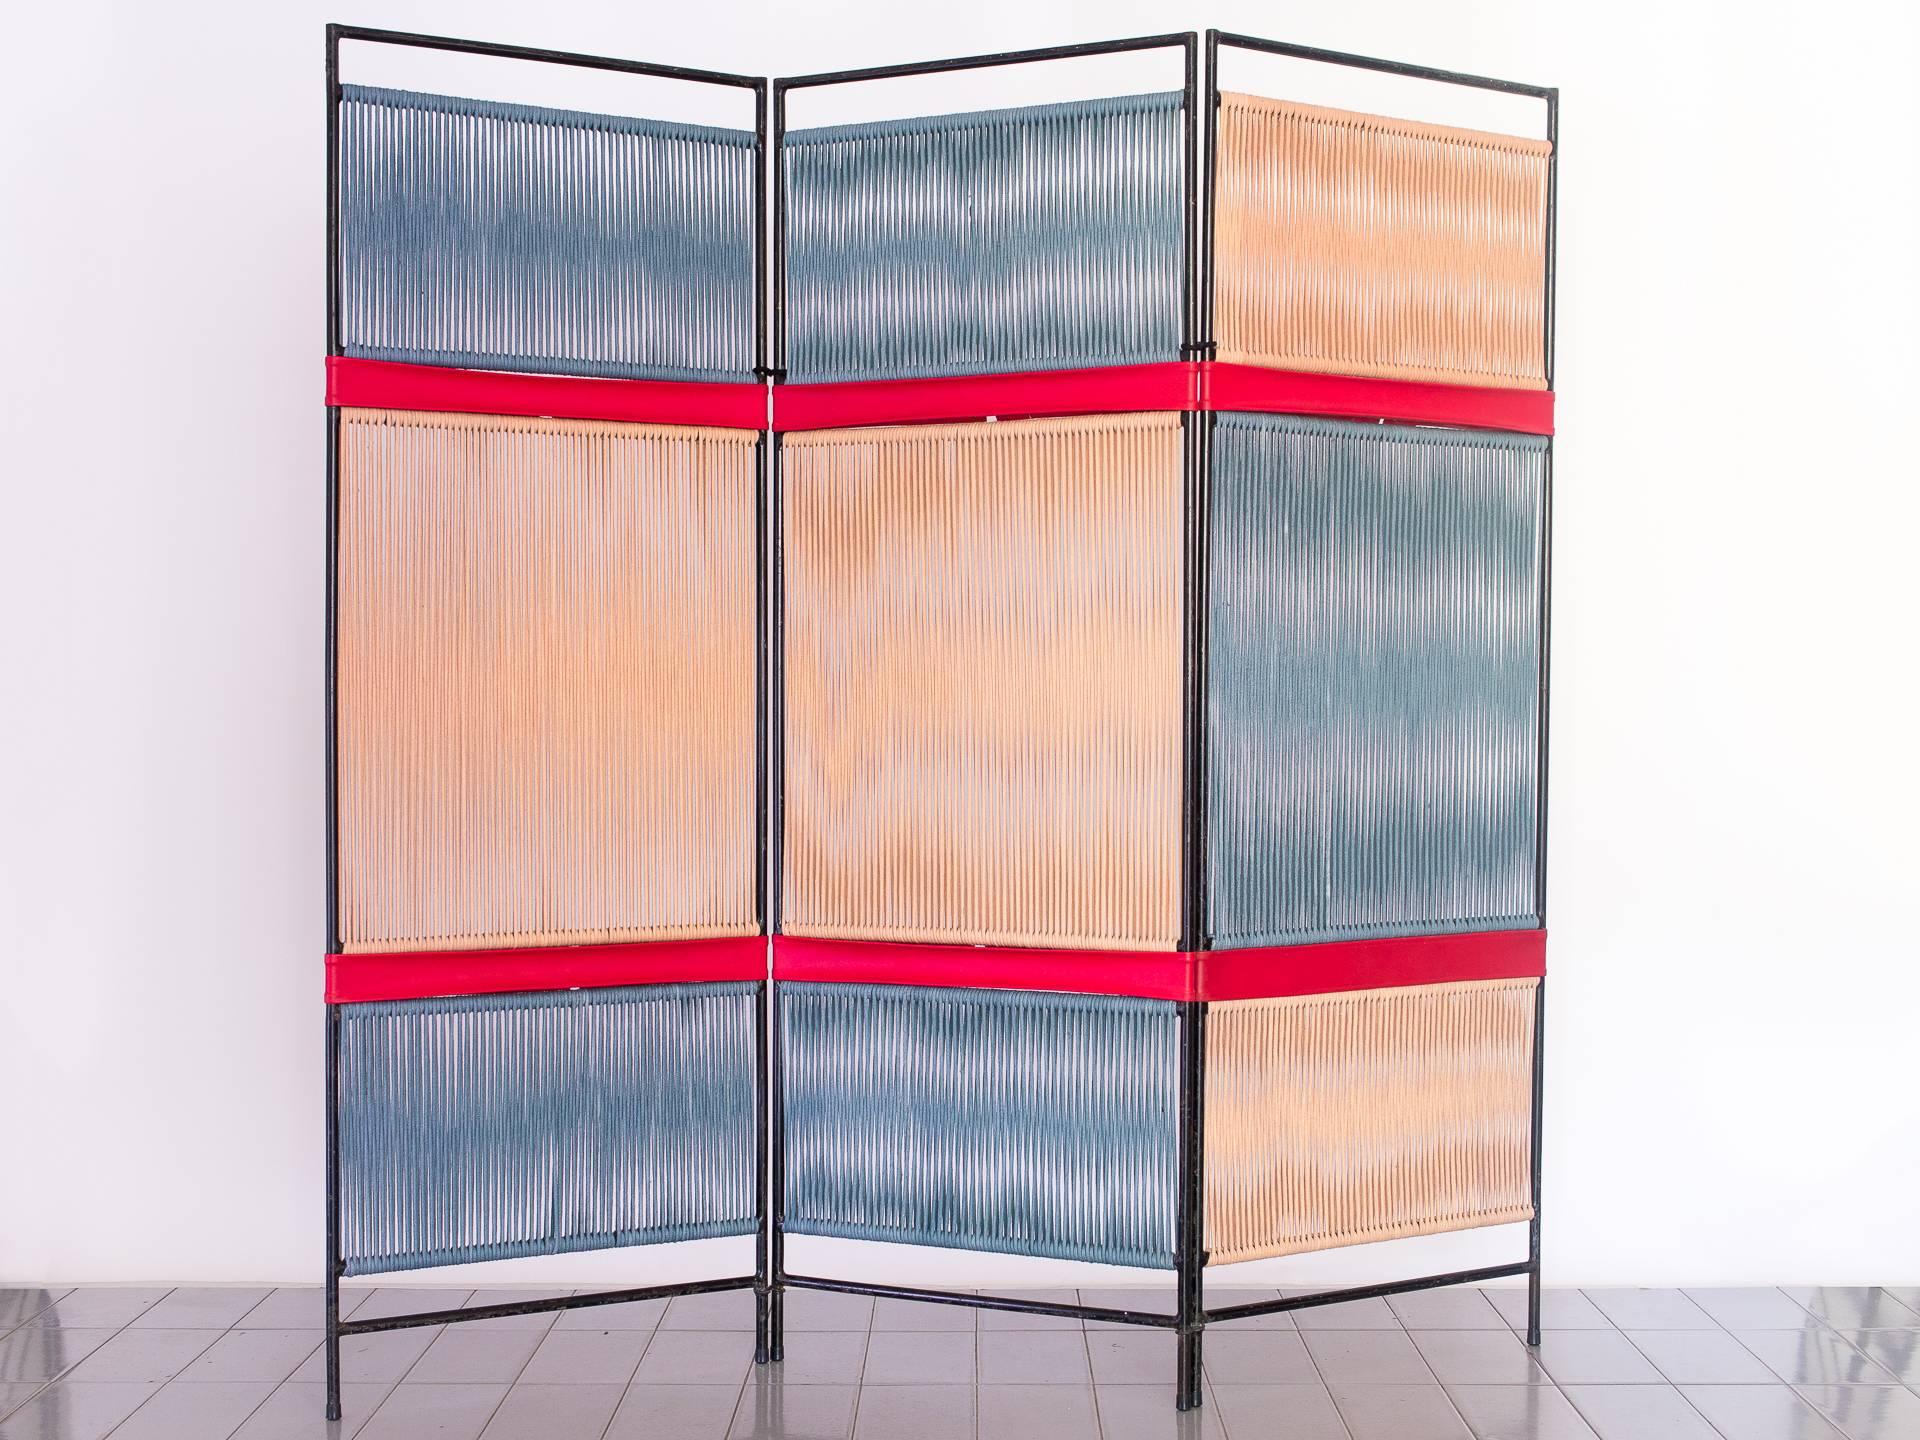 This folding screen / room divider is a unique piece designed by Tenreiro in the late 1950s. The proportions between panels and color disposition are typical of Tenreiro's geometrical pattern works, observed in several different custom